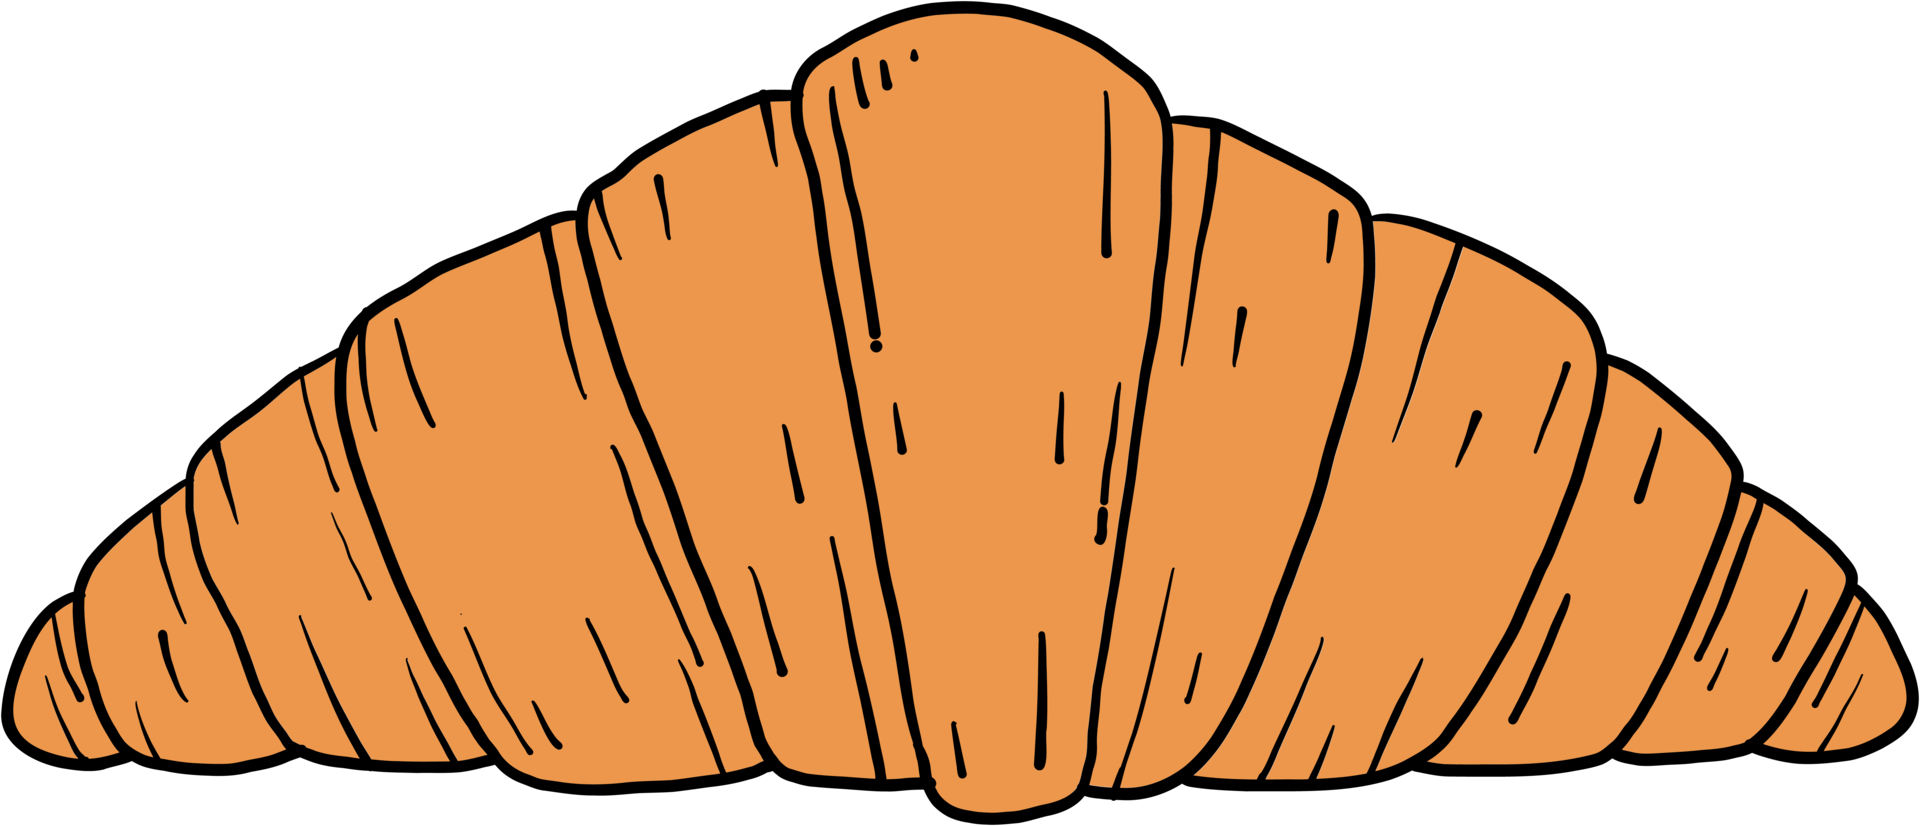 doodle freehand sketch drawing of croissant bread. png